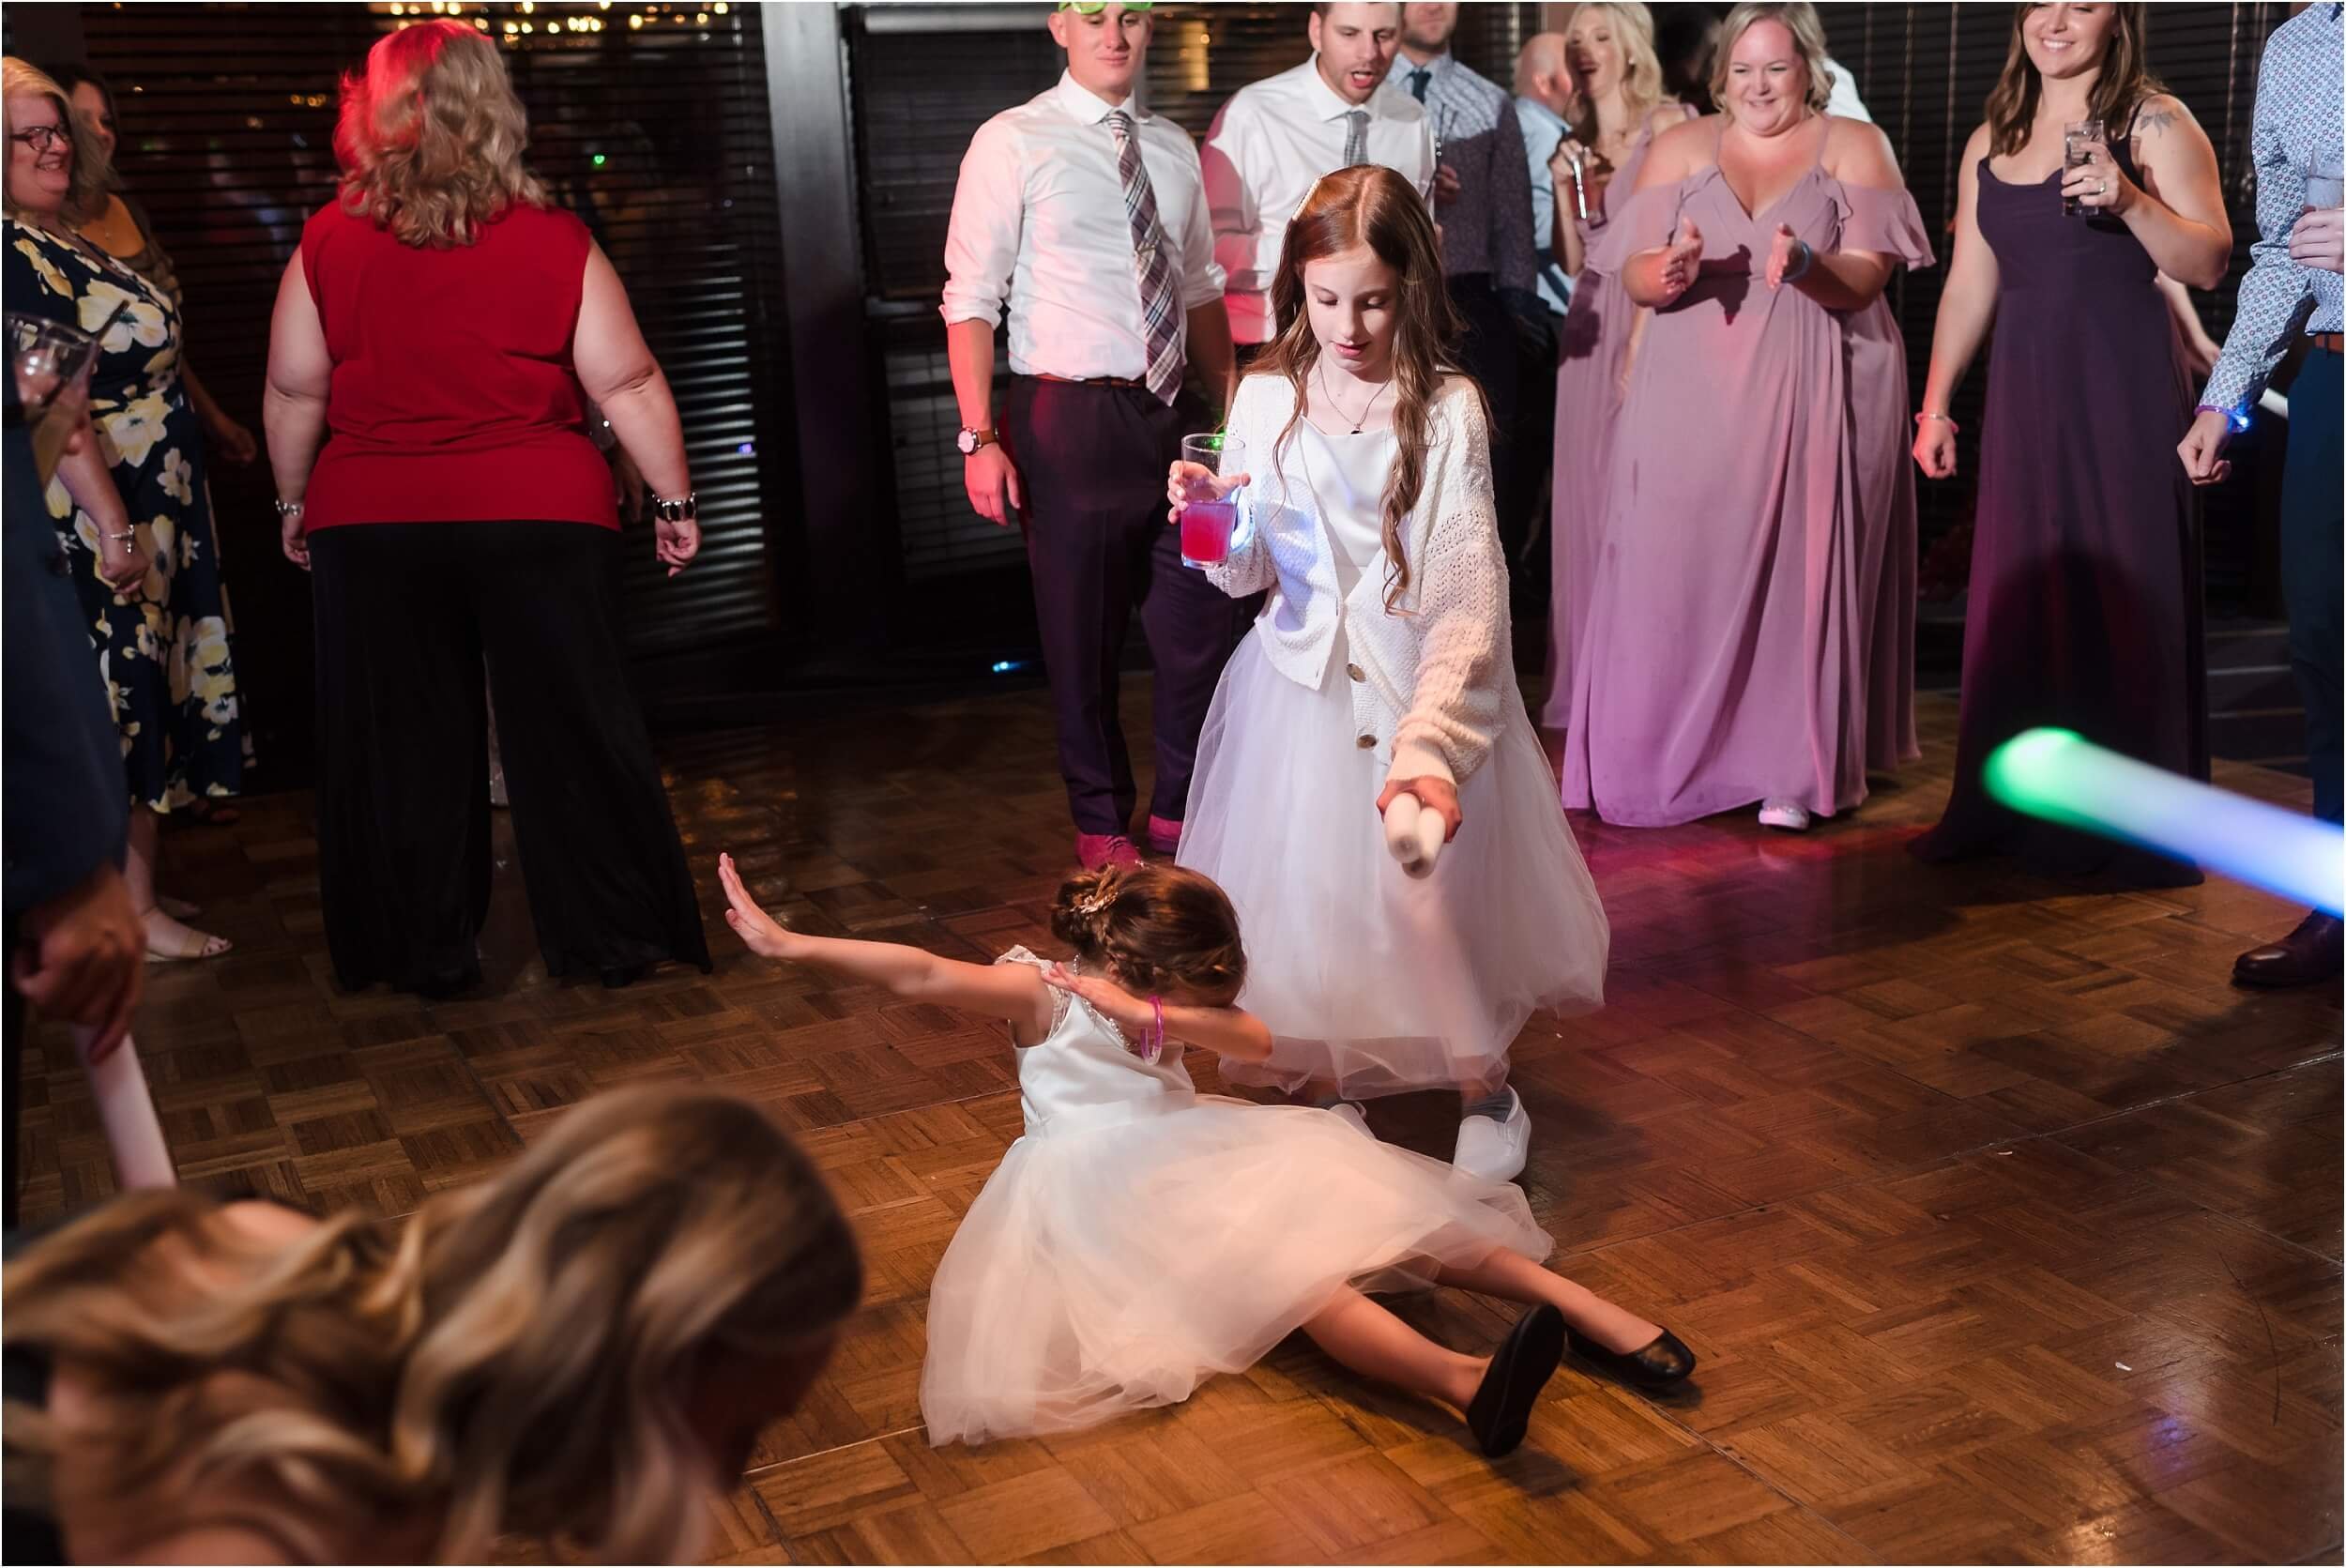  A little girl dabs on the dancefloor of a lively wedding reception.  